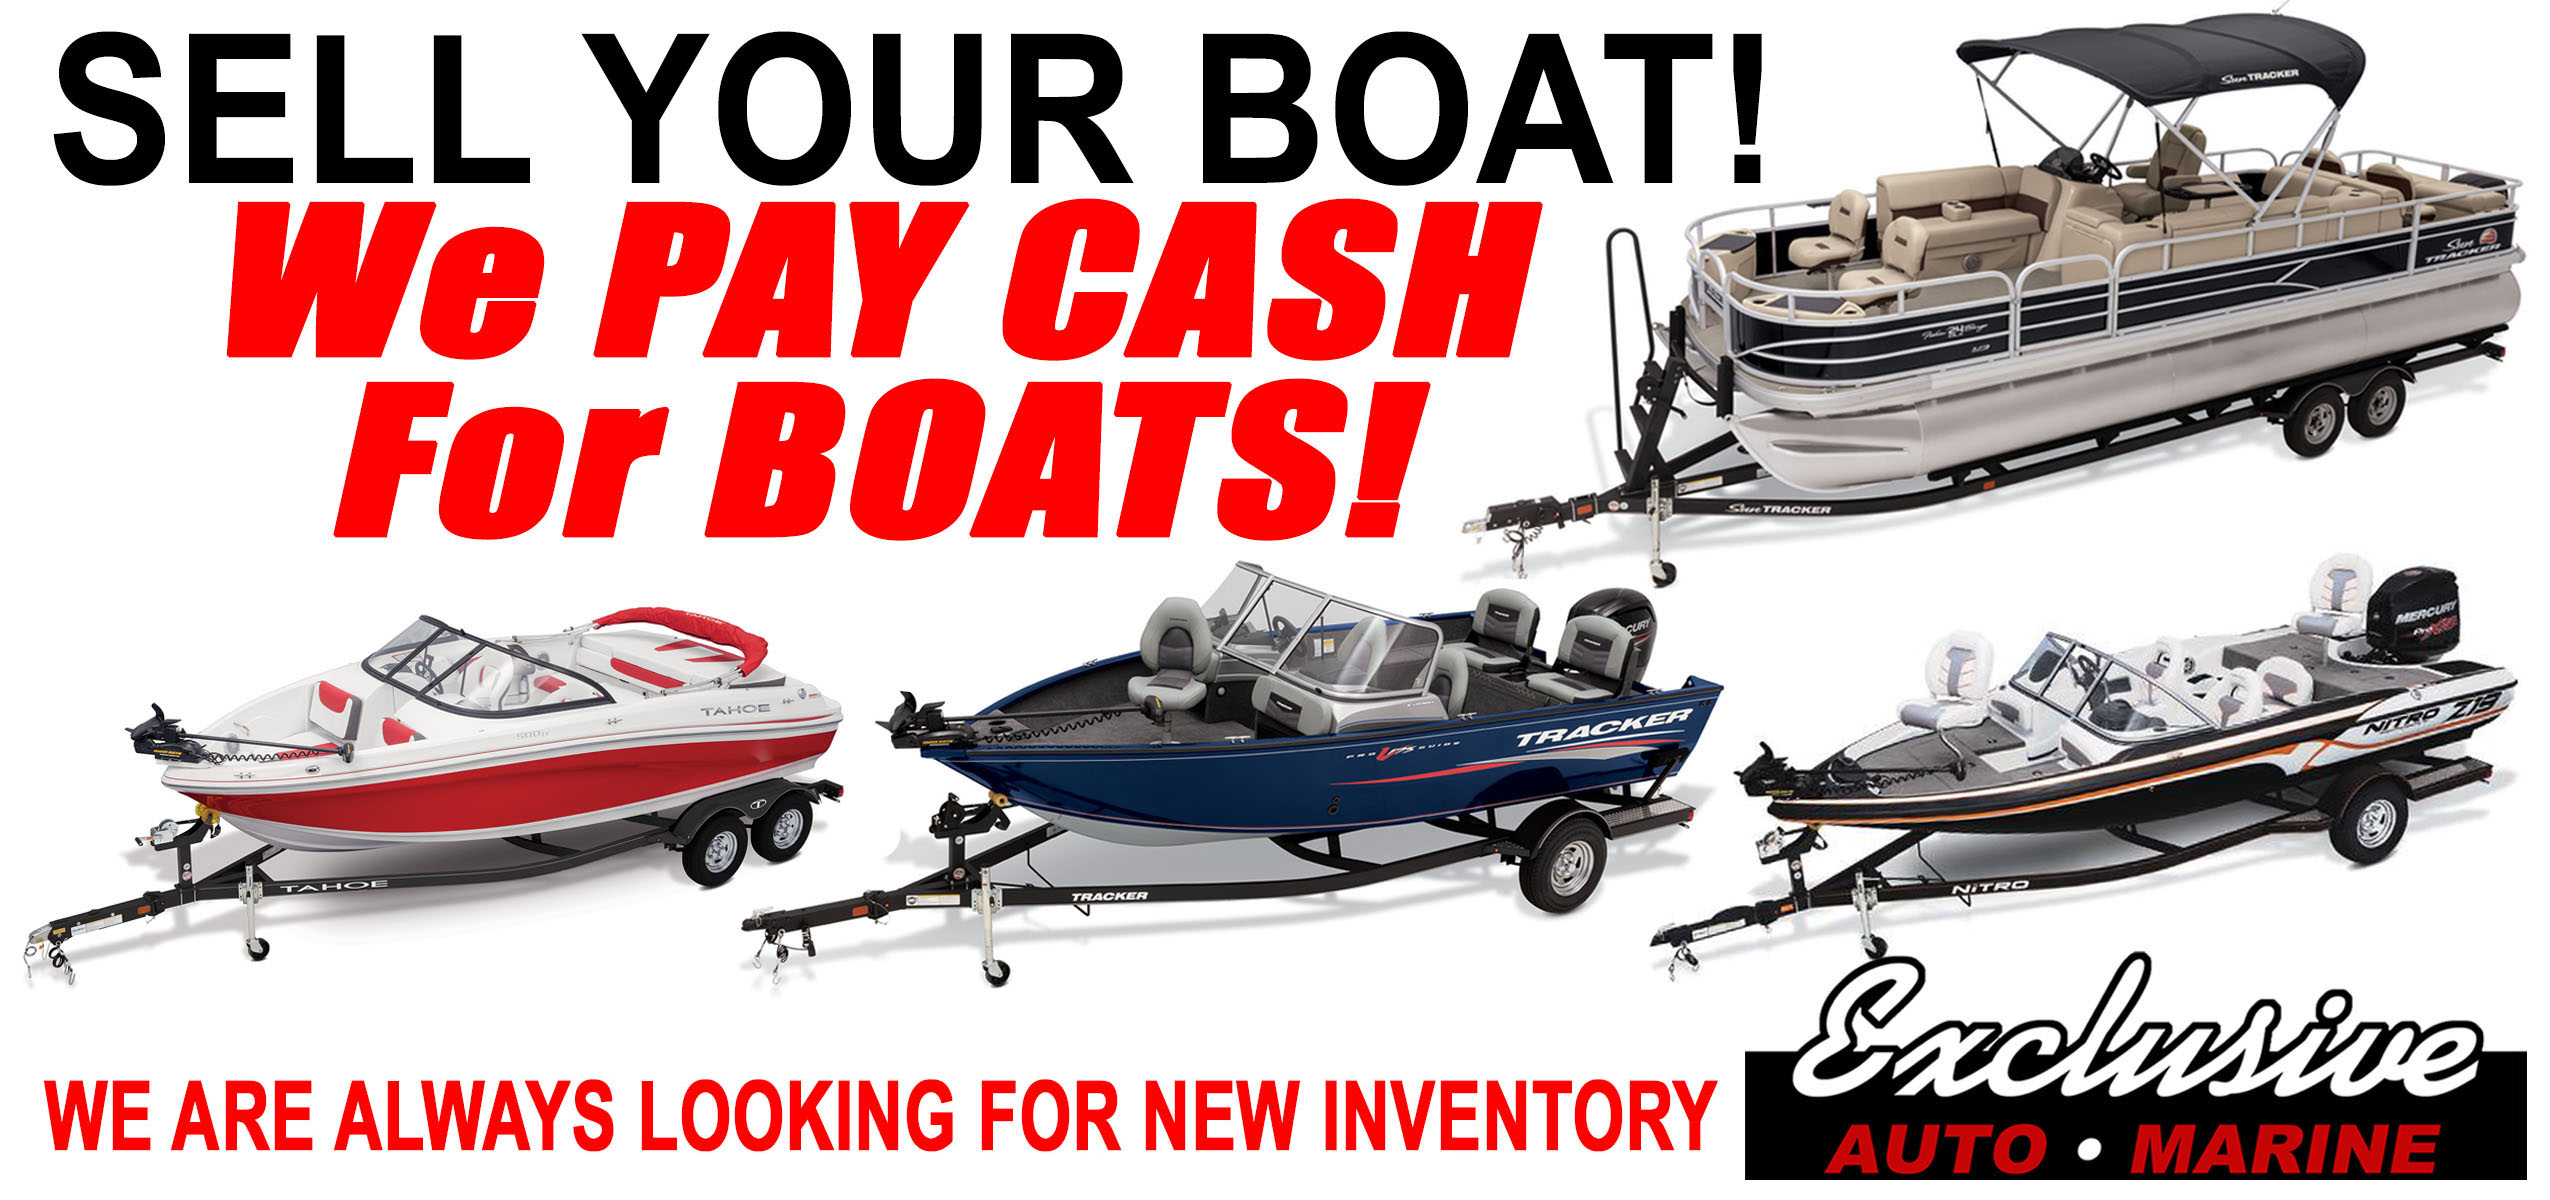 SELL YOUR BOAT! WE PAY CASH FOR BOATS! We are always looking for new inventory! ad